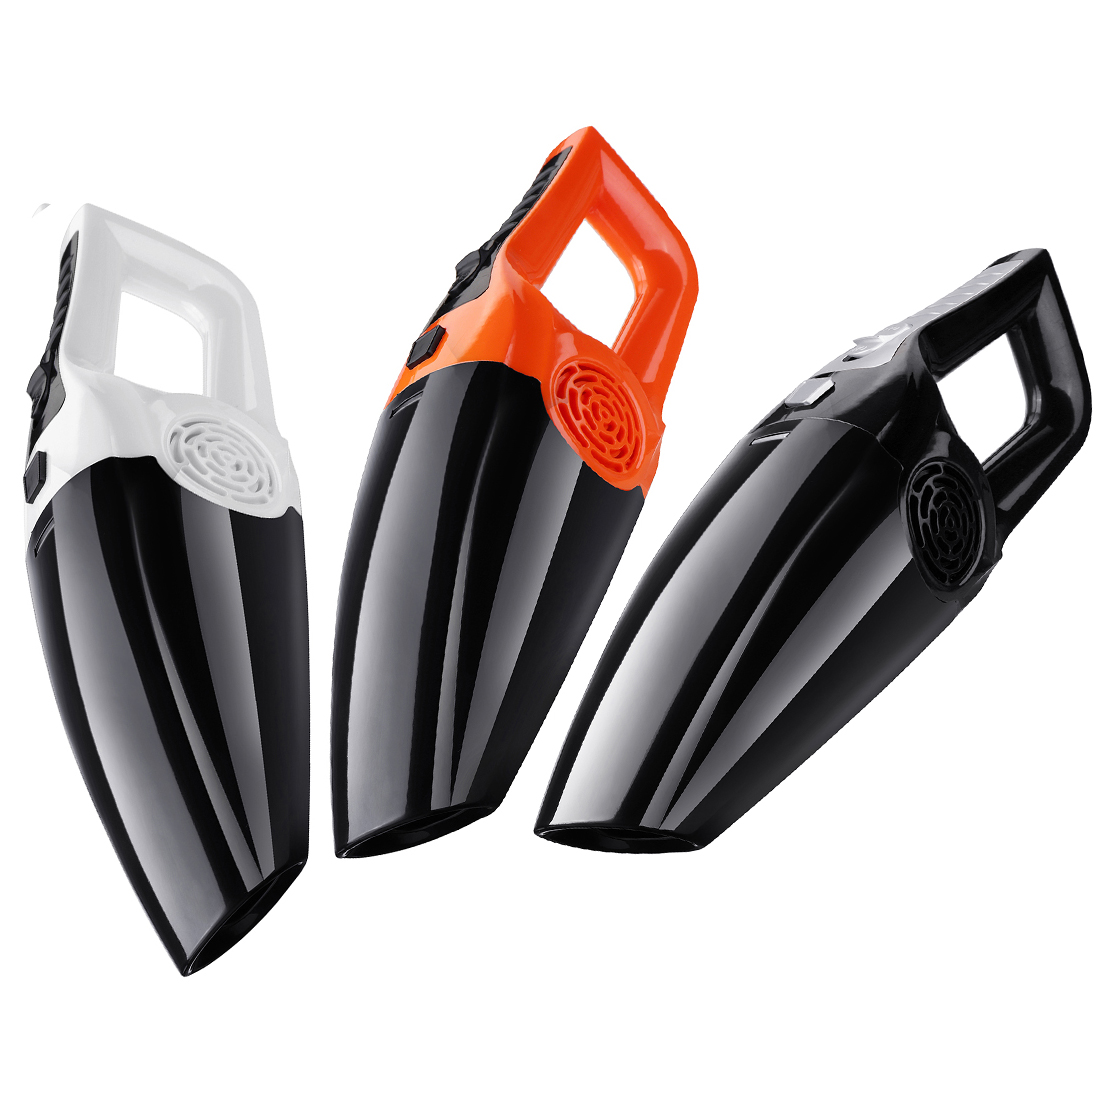 

8000Pa 120w Car Vacuum Cleaner High Power Wet And Dry Strong Suction Portable Vacuum Cleaner